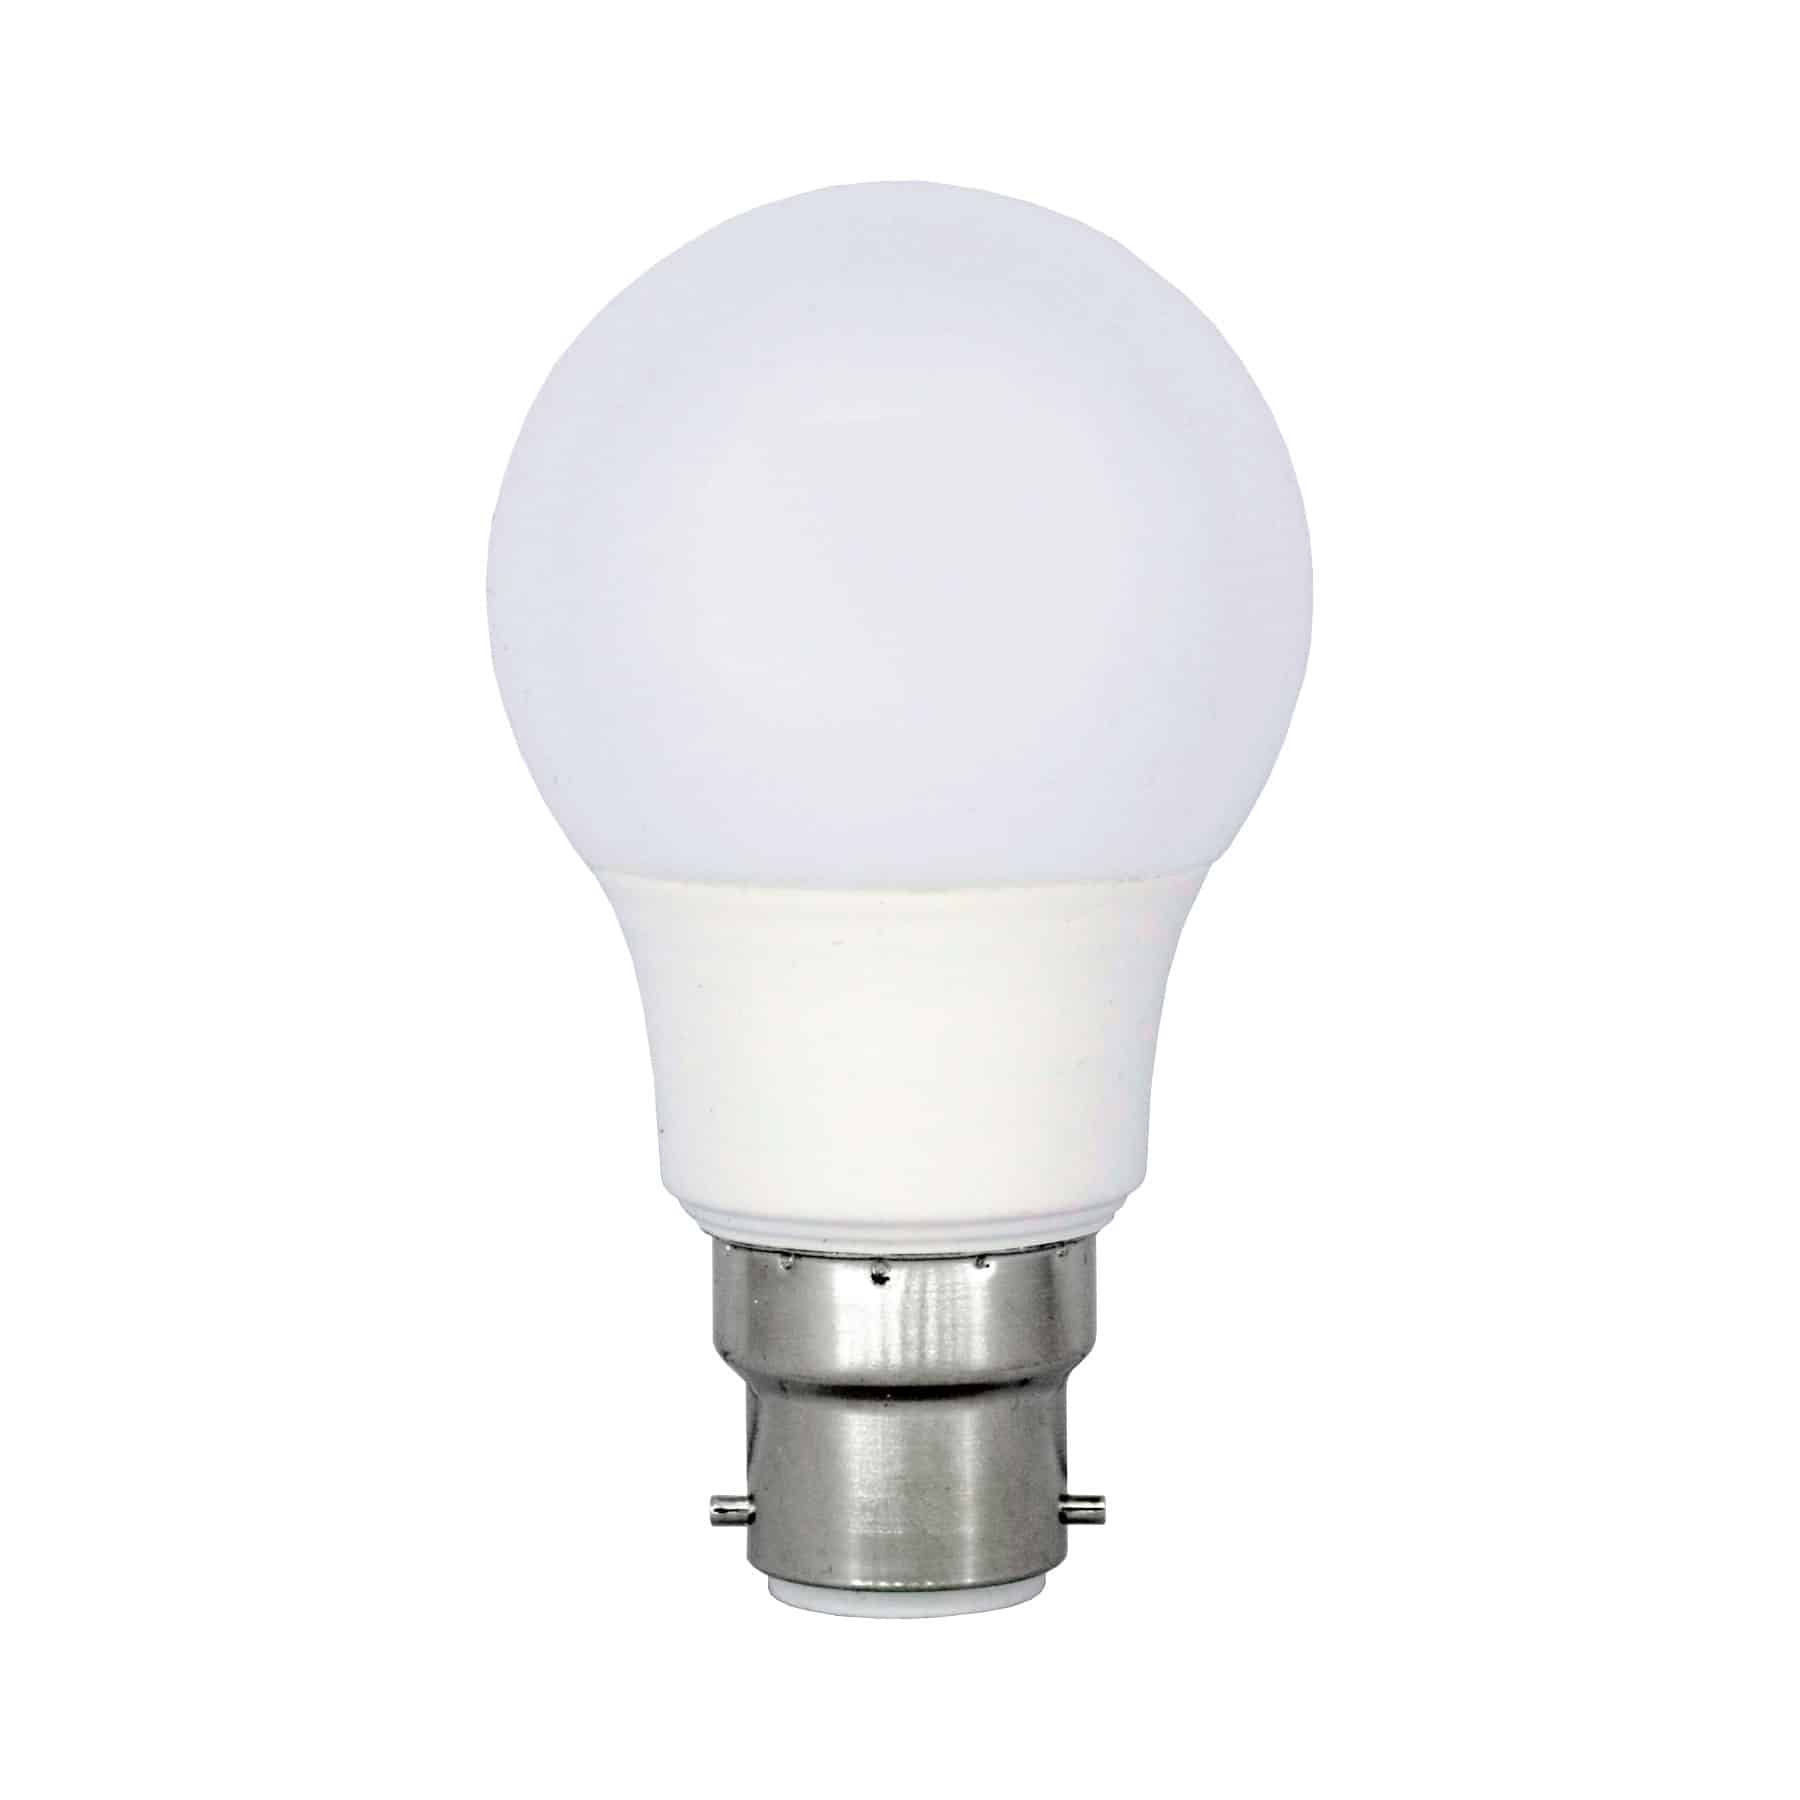 Bright Energy Saving Lamp Warm Day 15w LED Light Bulb Traditional A65 GLS A 